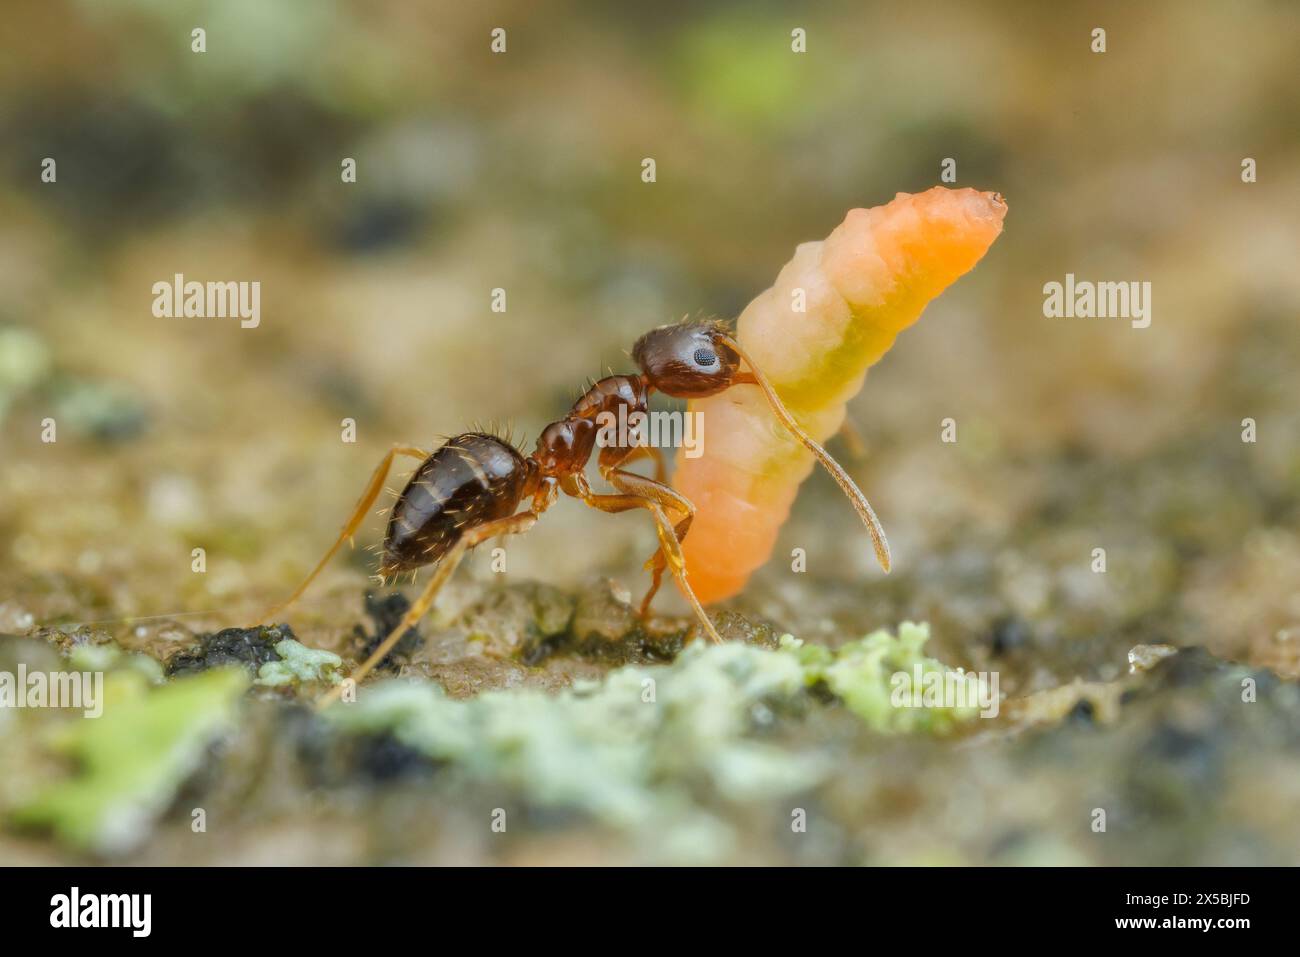 A foraging Crazy Ant (Nylanderia flavipes) worker carries a scavenged insect larva back to its nest. Stock Photo